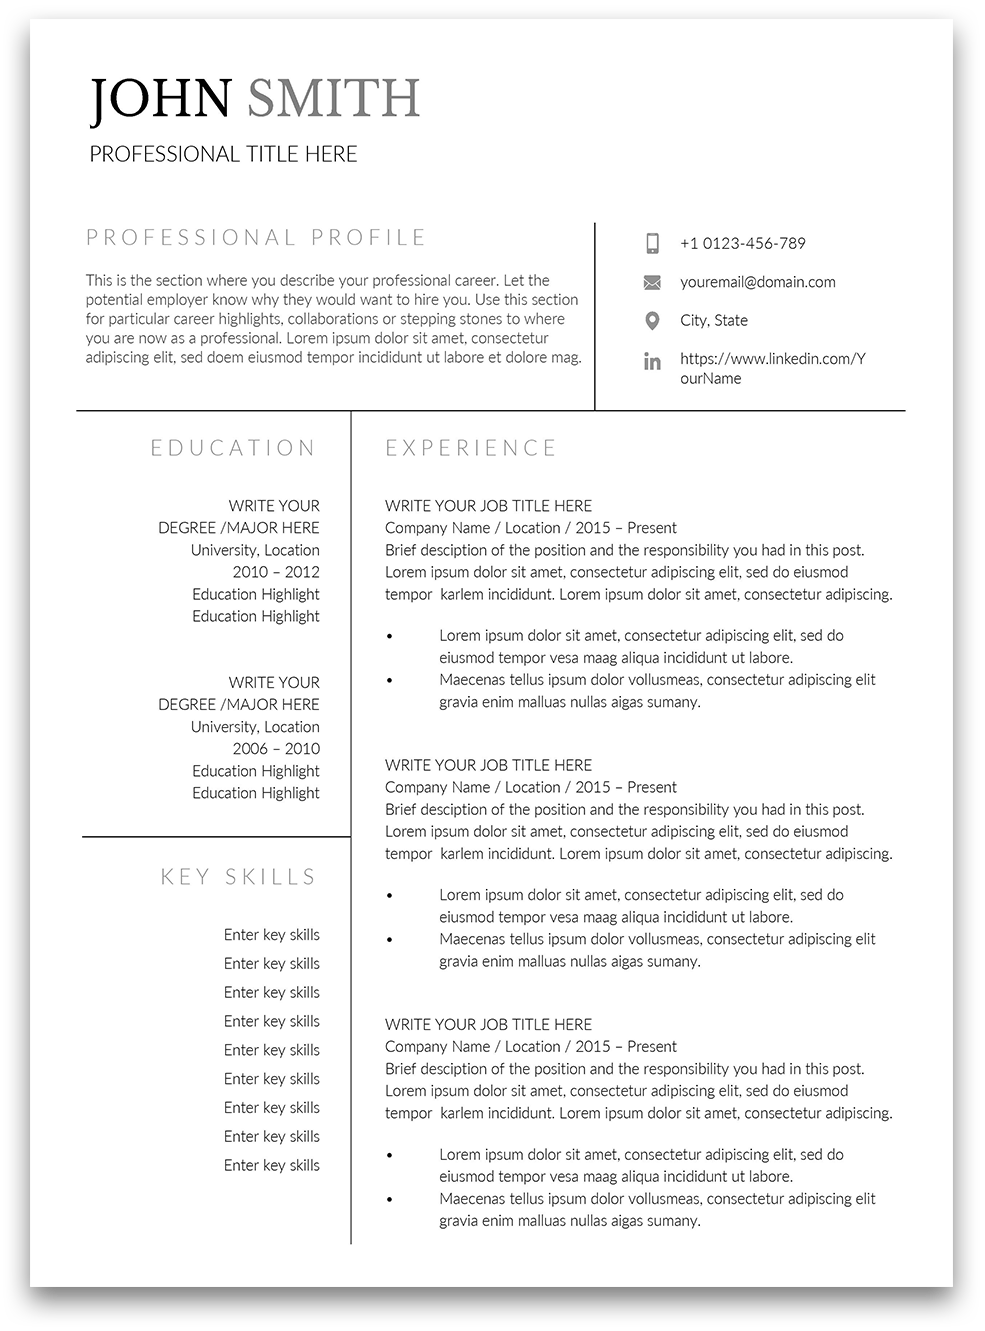 resume-html-template-25-resume-templates-for-google-docs-free-download-so-if-you-wish-to